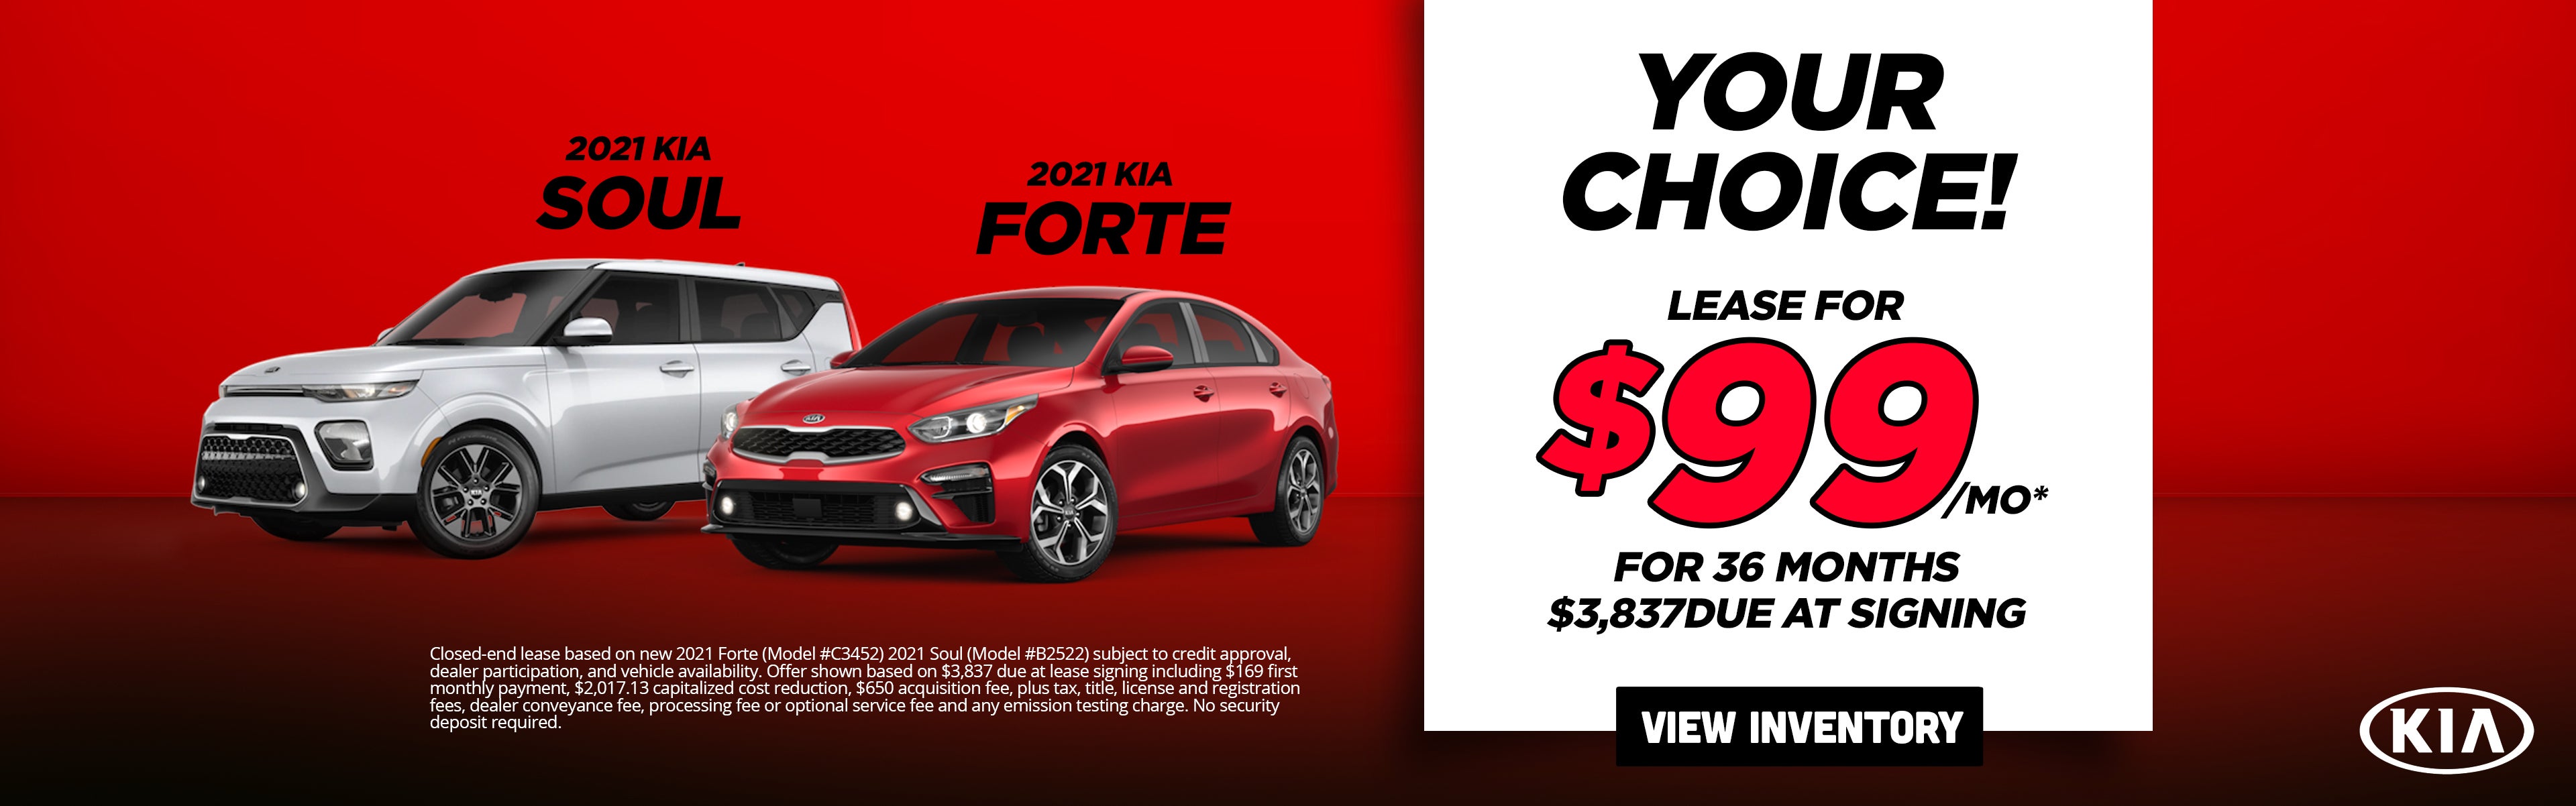 Your Choice! $99 Lease for 2021 Soul or Forte!